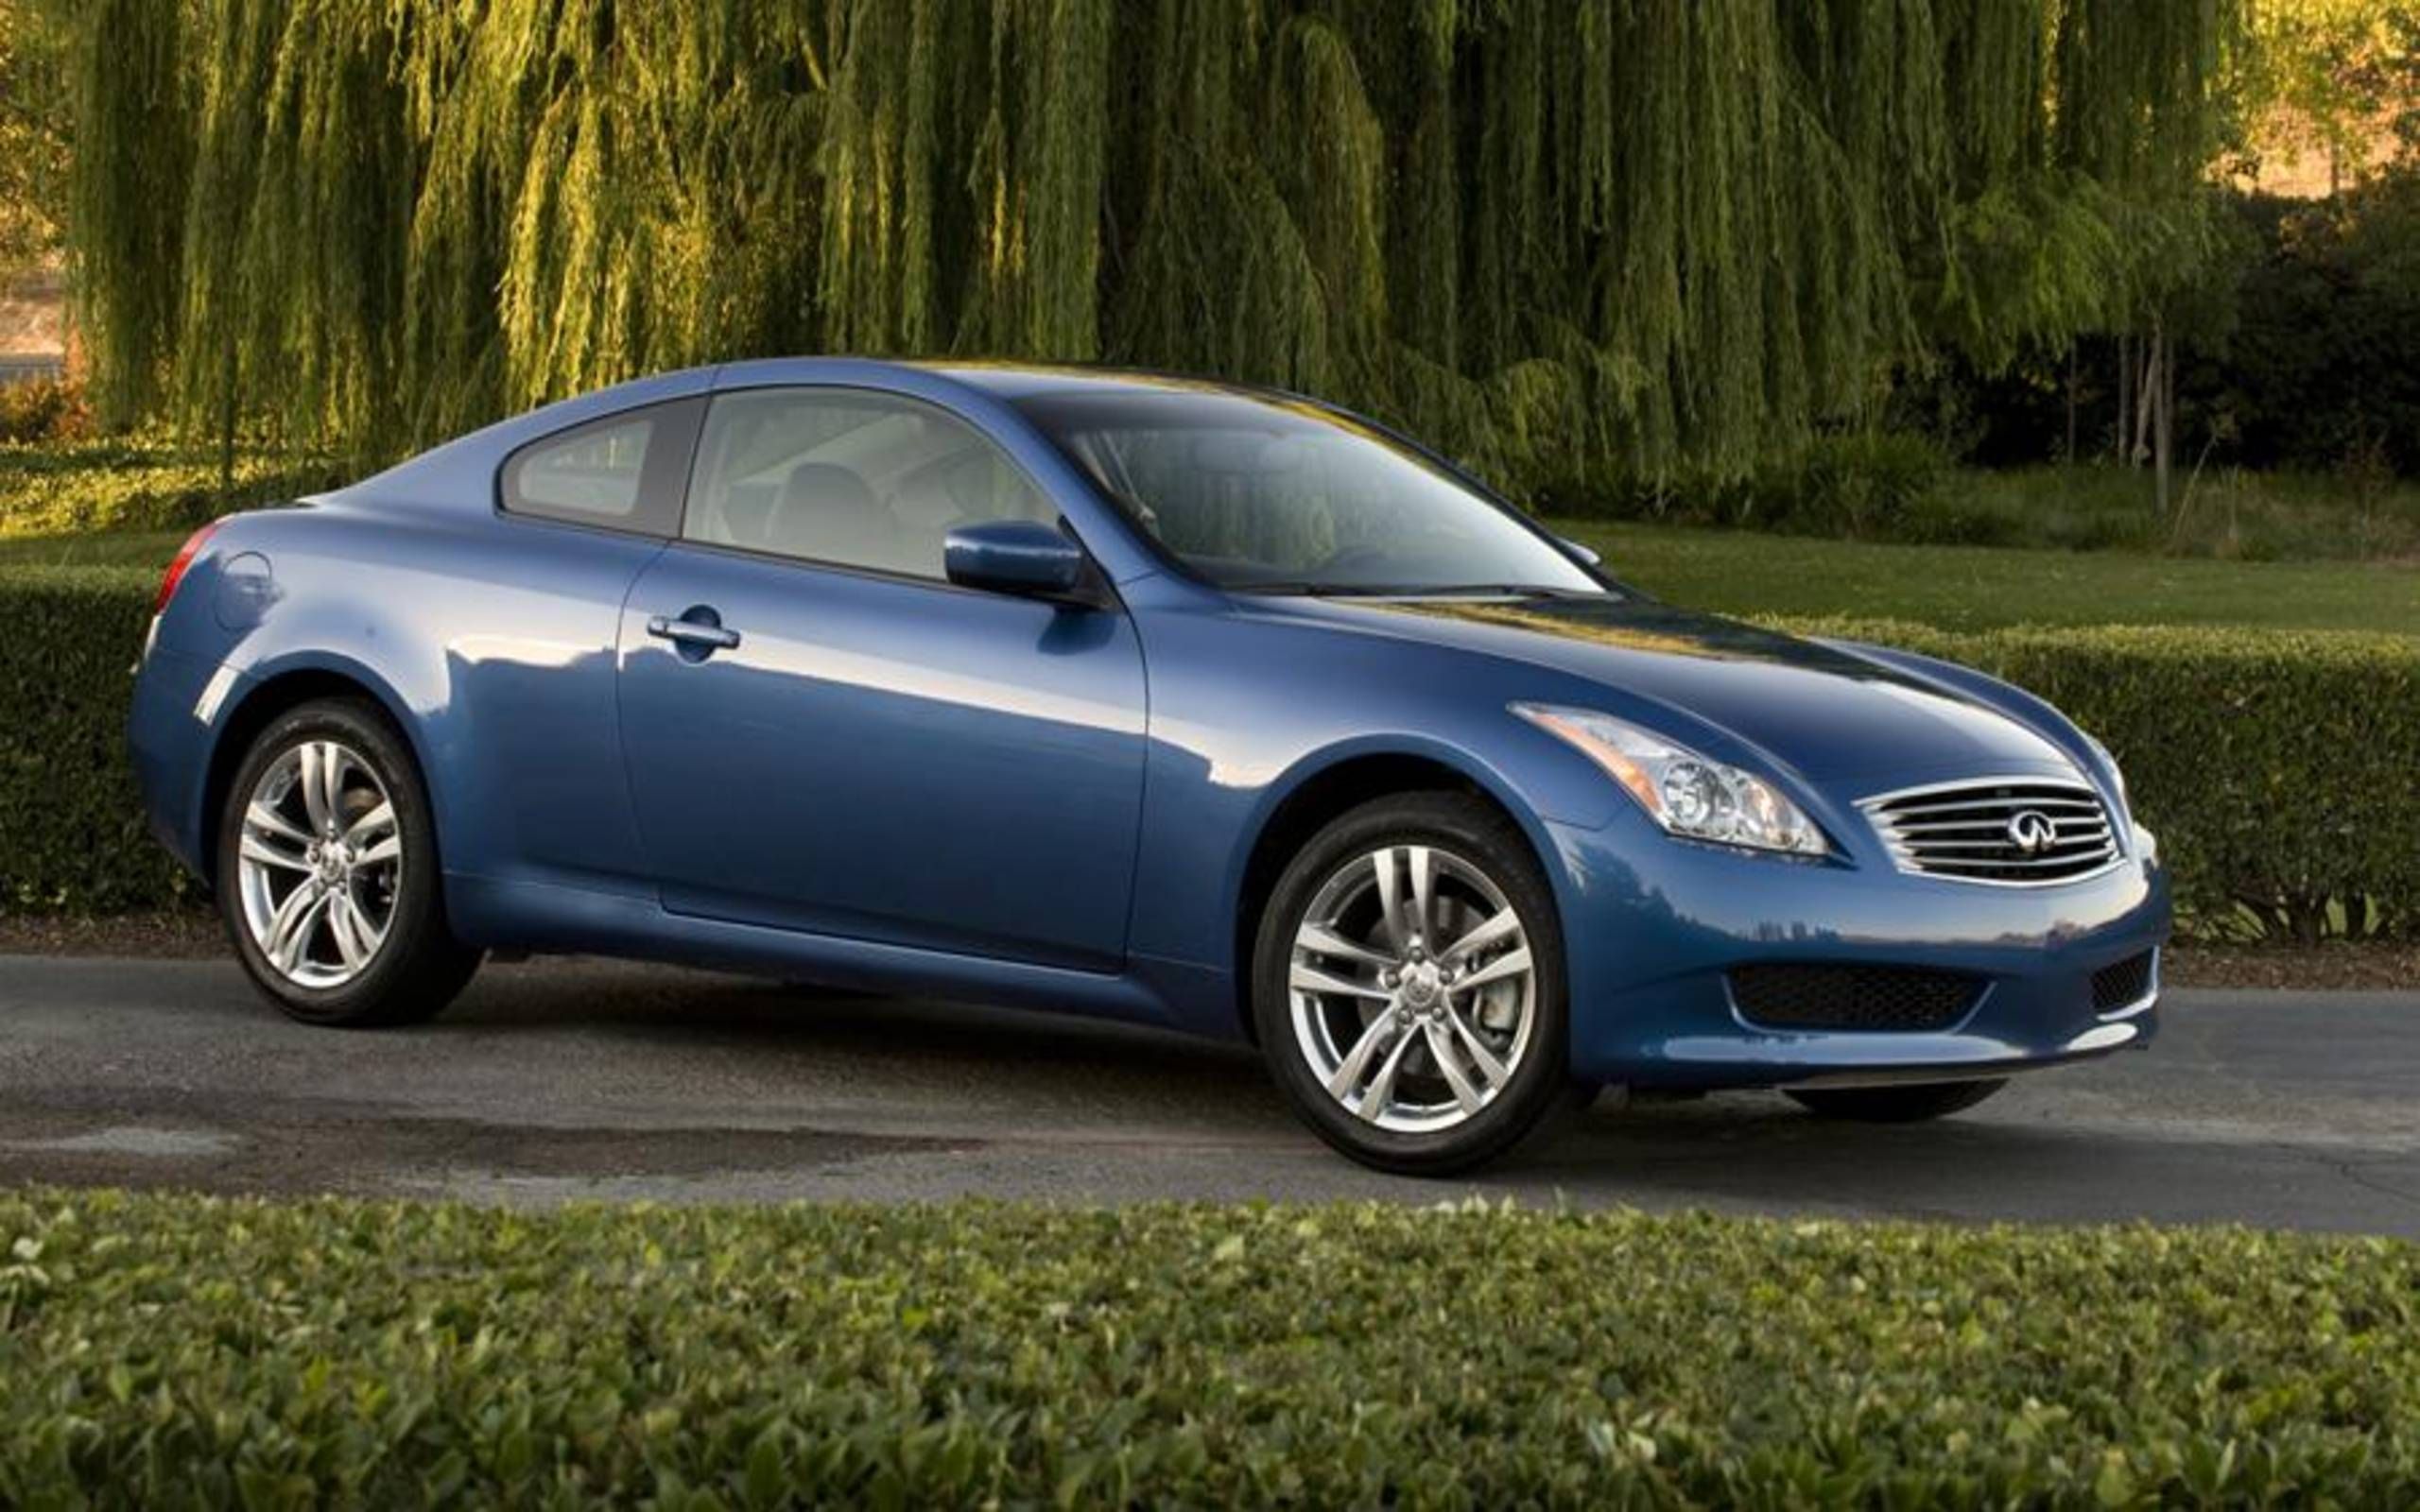 The 2009 Infiniti G37X Coupe - an AutoWeek Performance Review